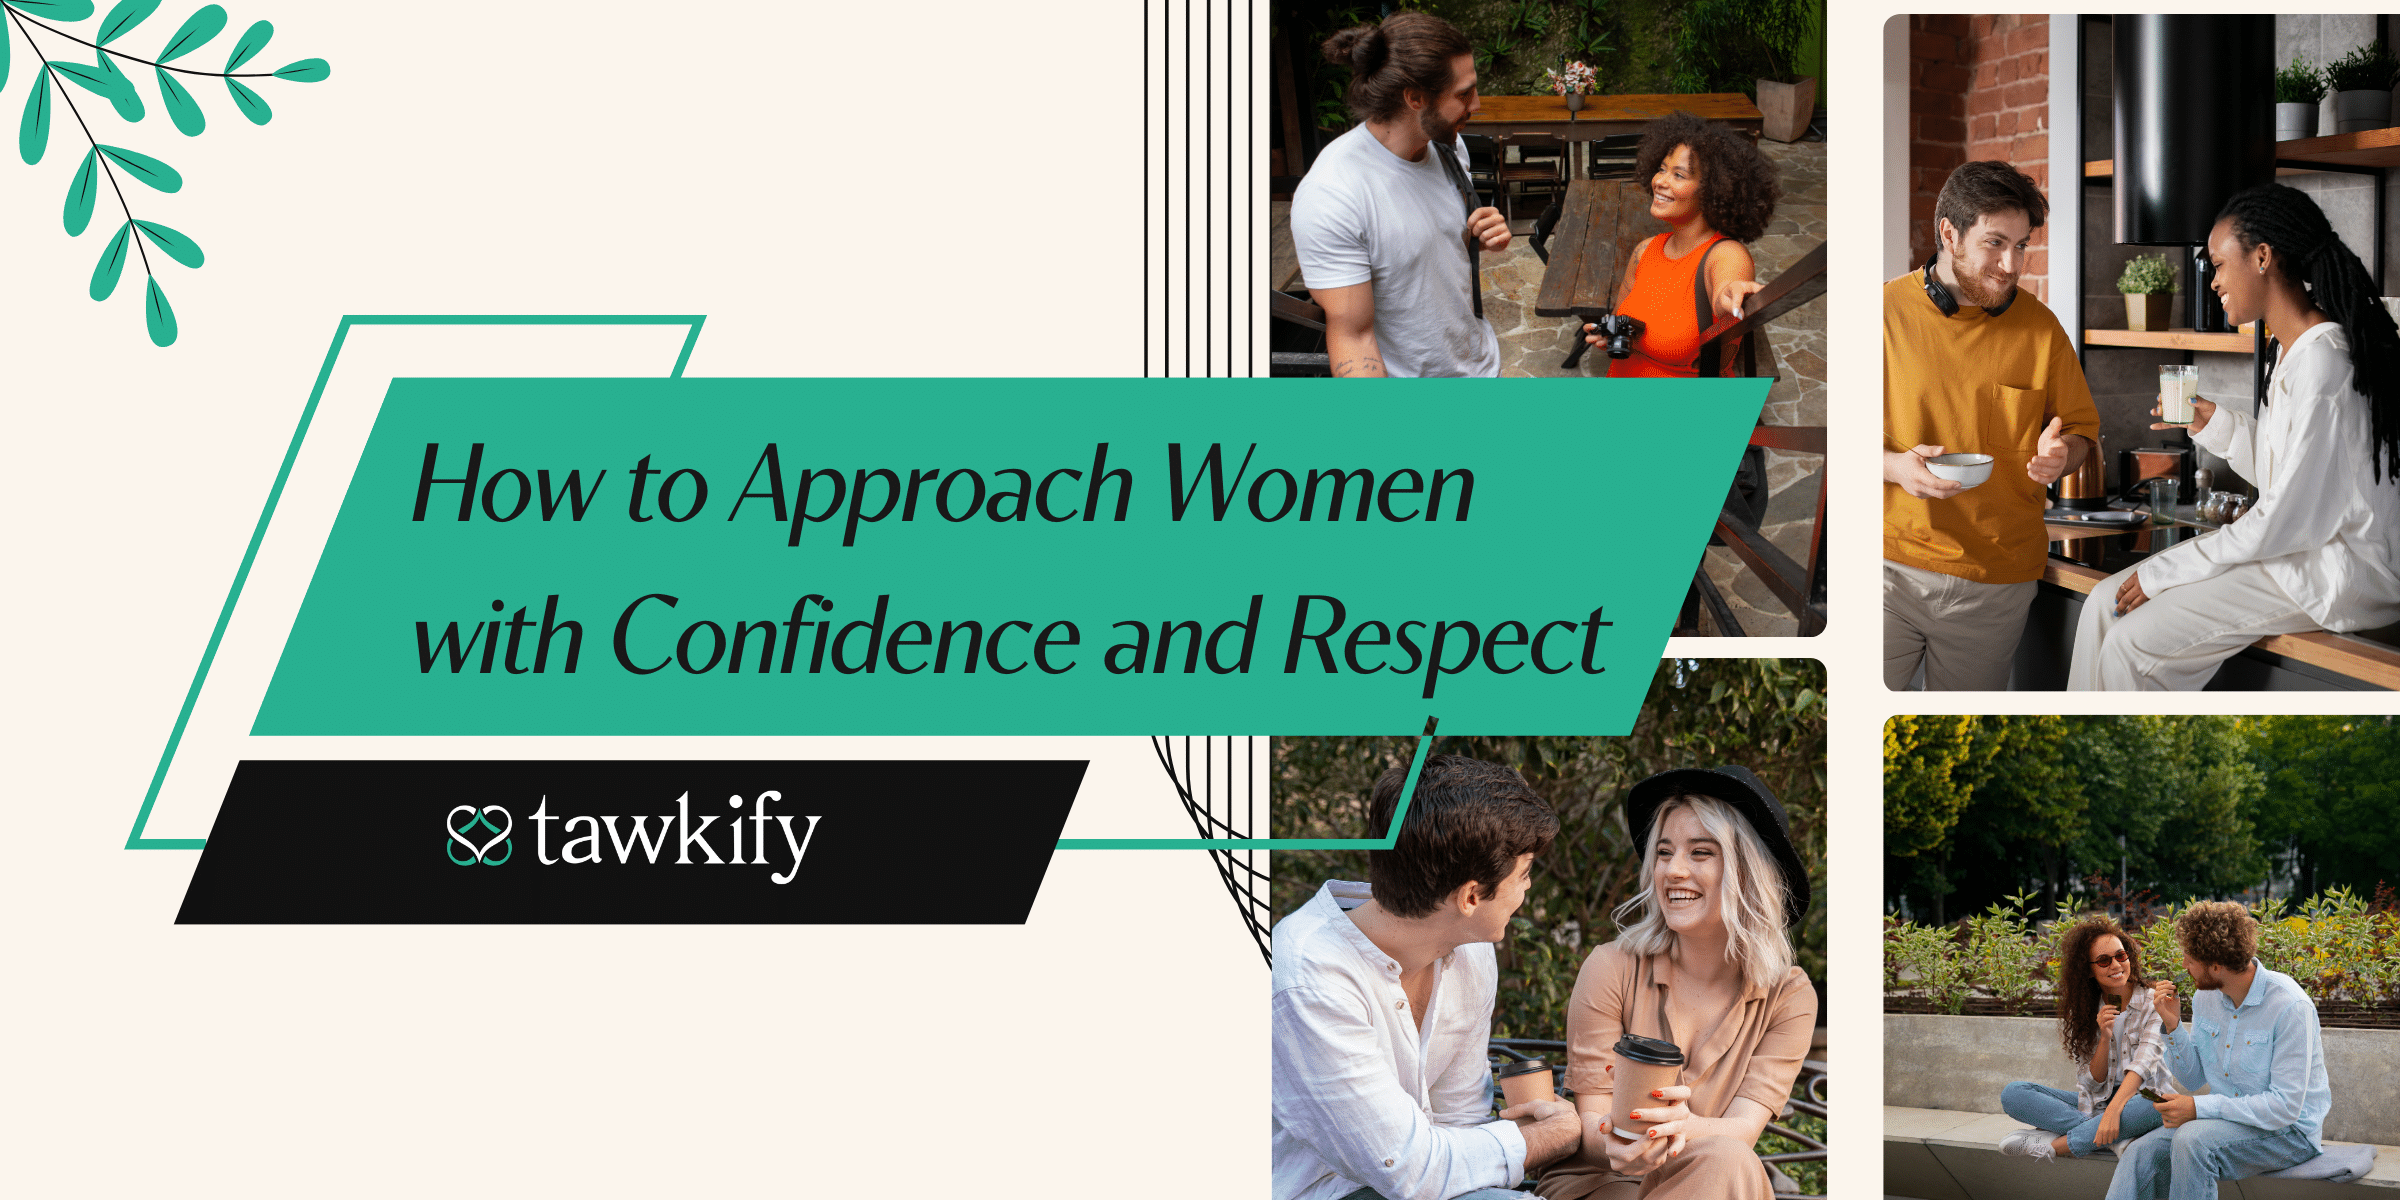 Apprehensive about how to approach a woman respectfully? We offer the best tips on how to approach women in public and what to say to them.